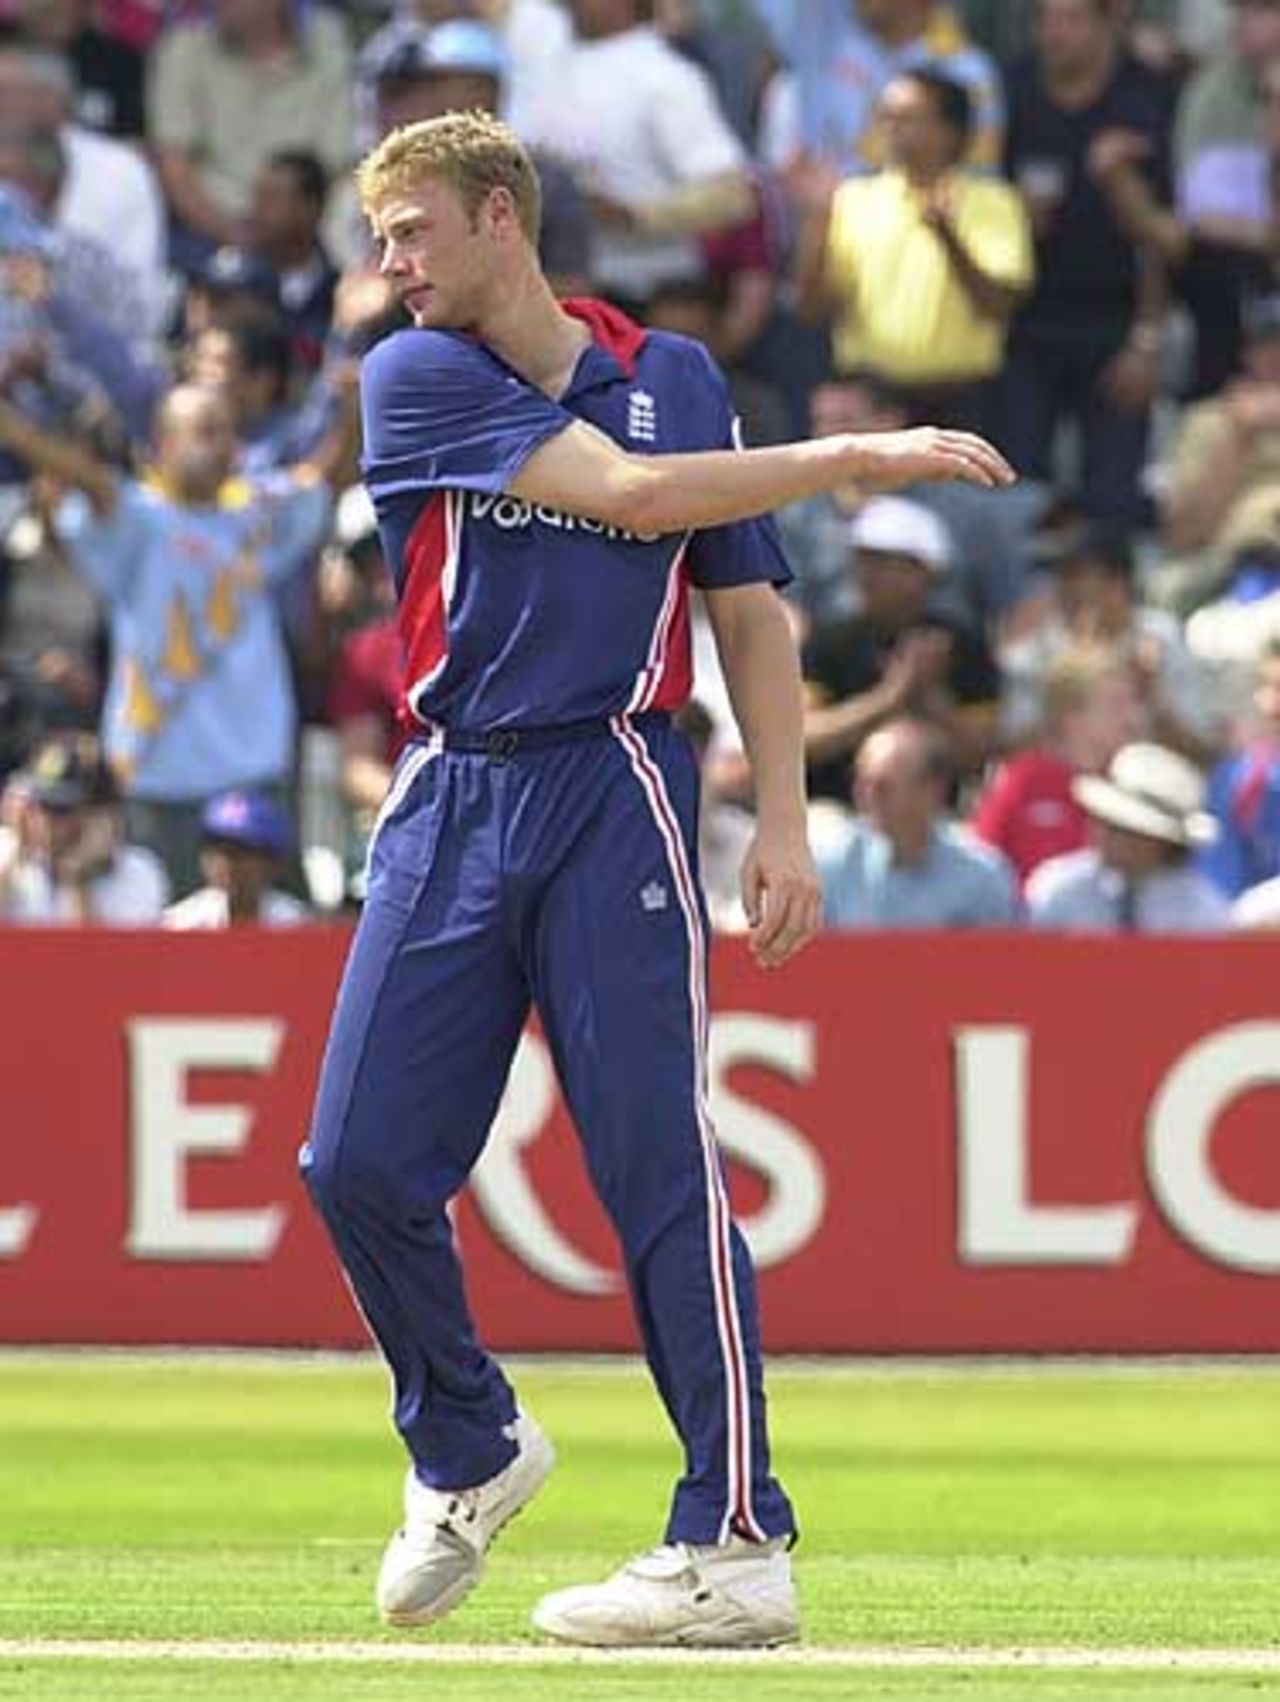 Flintoff is clearly fed up that his bowling is being despatched to all parts of the ground, England v India, NatWest Series, Lord's, Sat 29 Jun